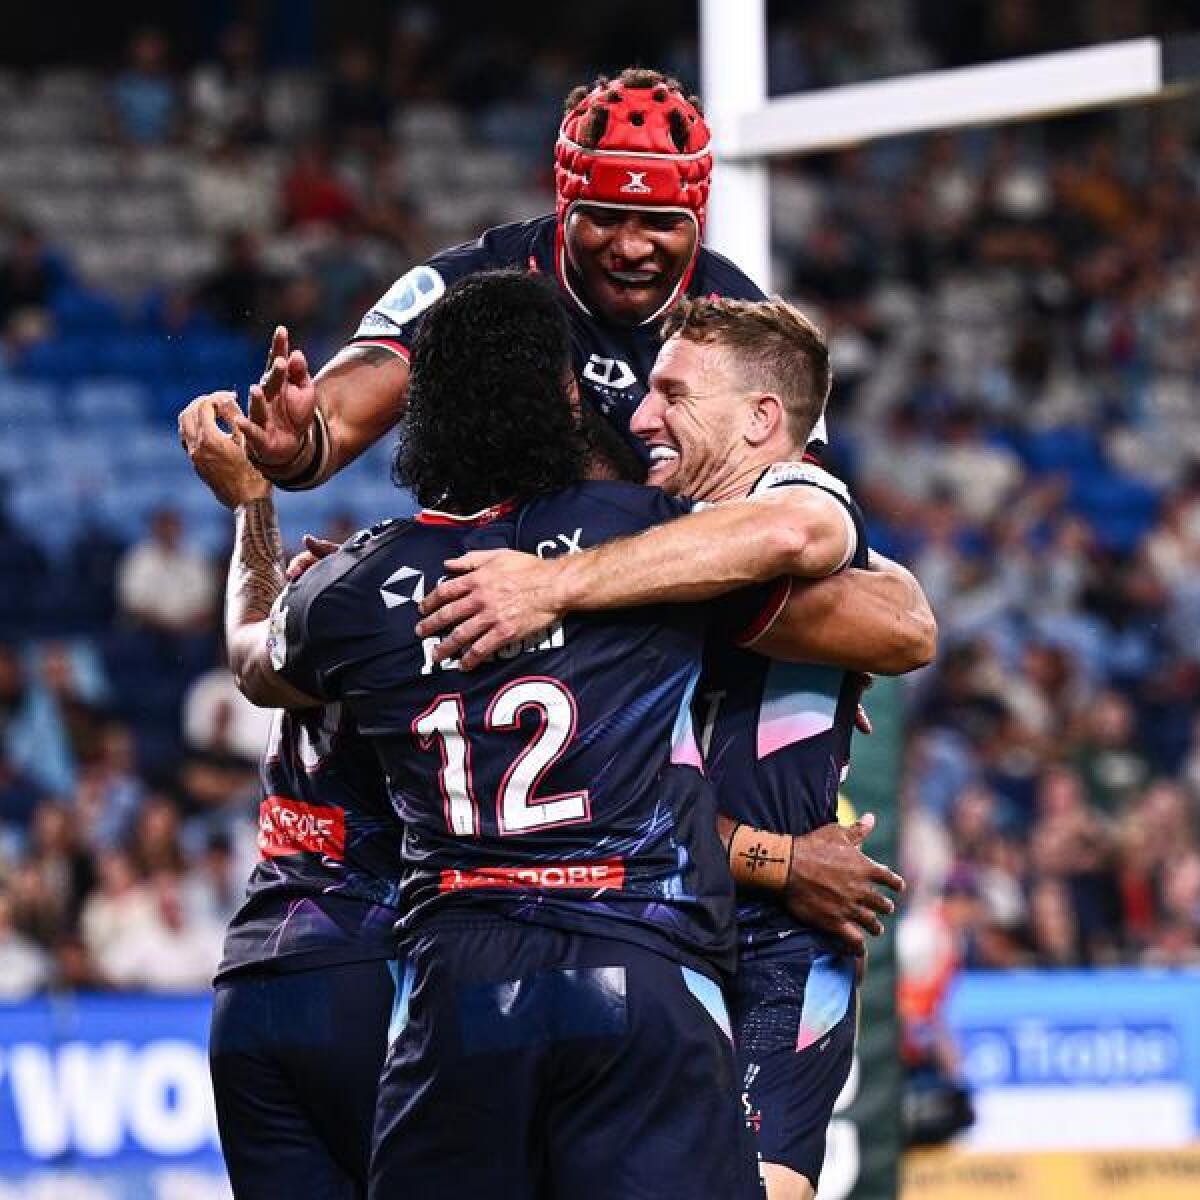 Melbourne players celebrating a try.